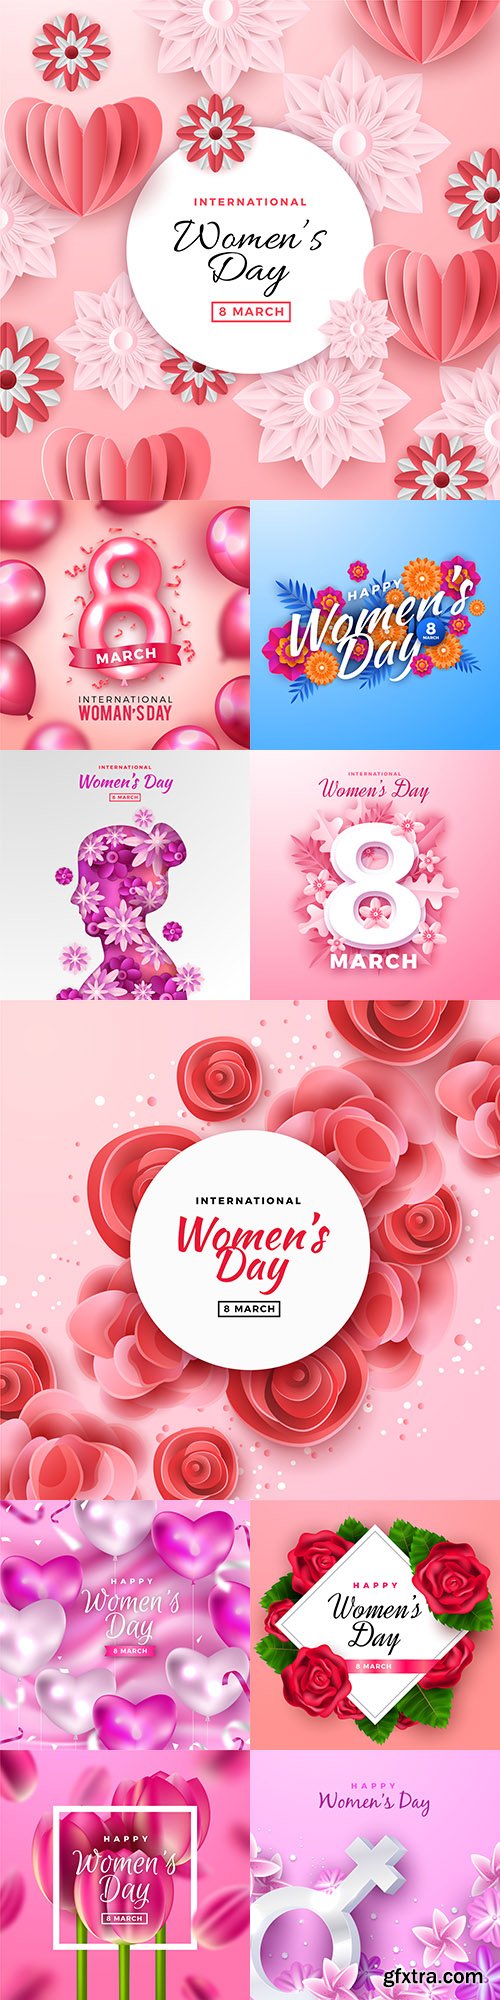 March 8 and Women\'s Day illustration design 6